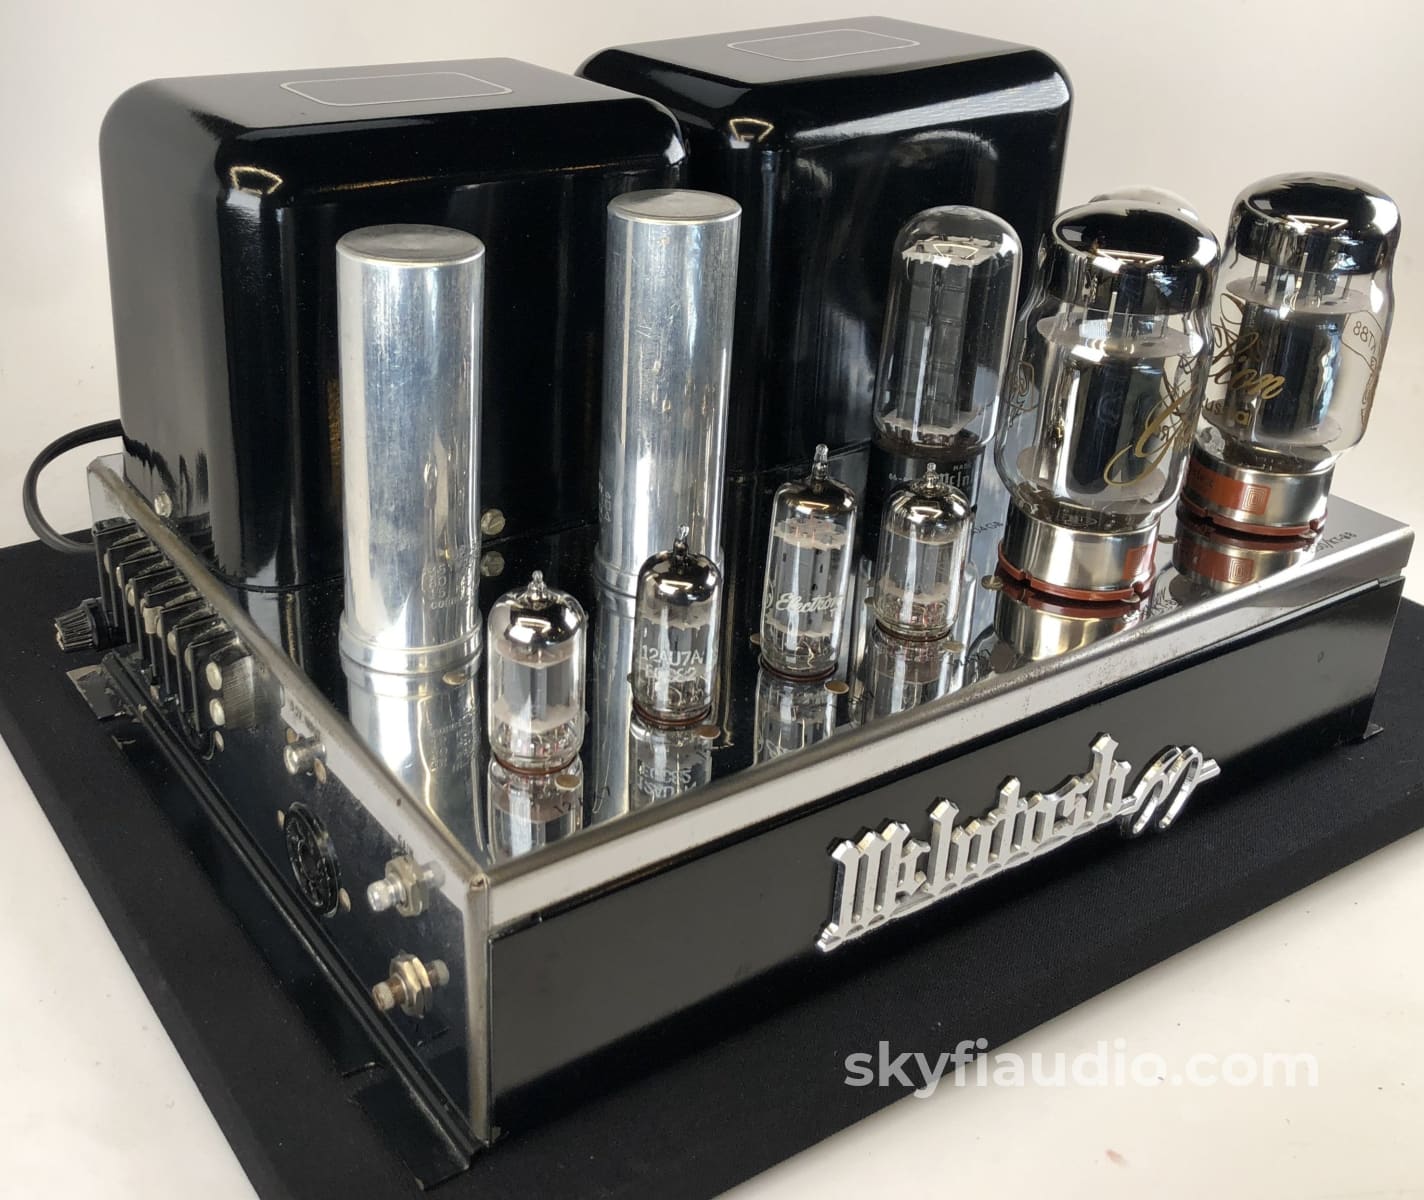 Mcintosh Mc60 Tube Mono Amplifiers - Very Clean And Working Perfectly Amplifier